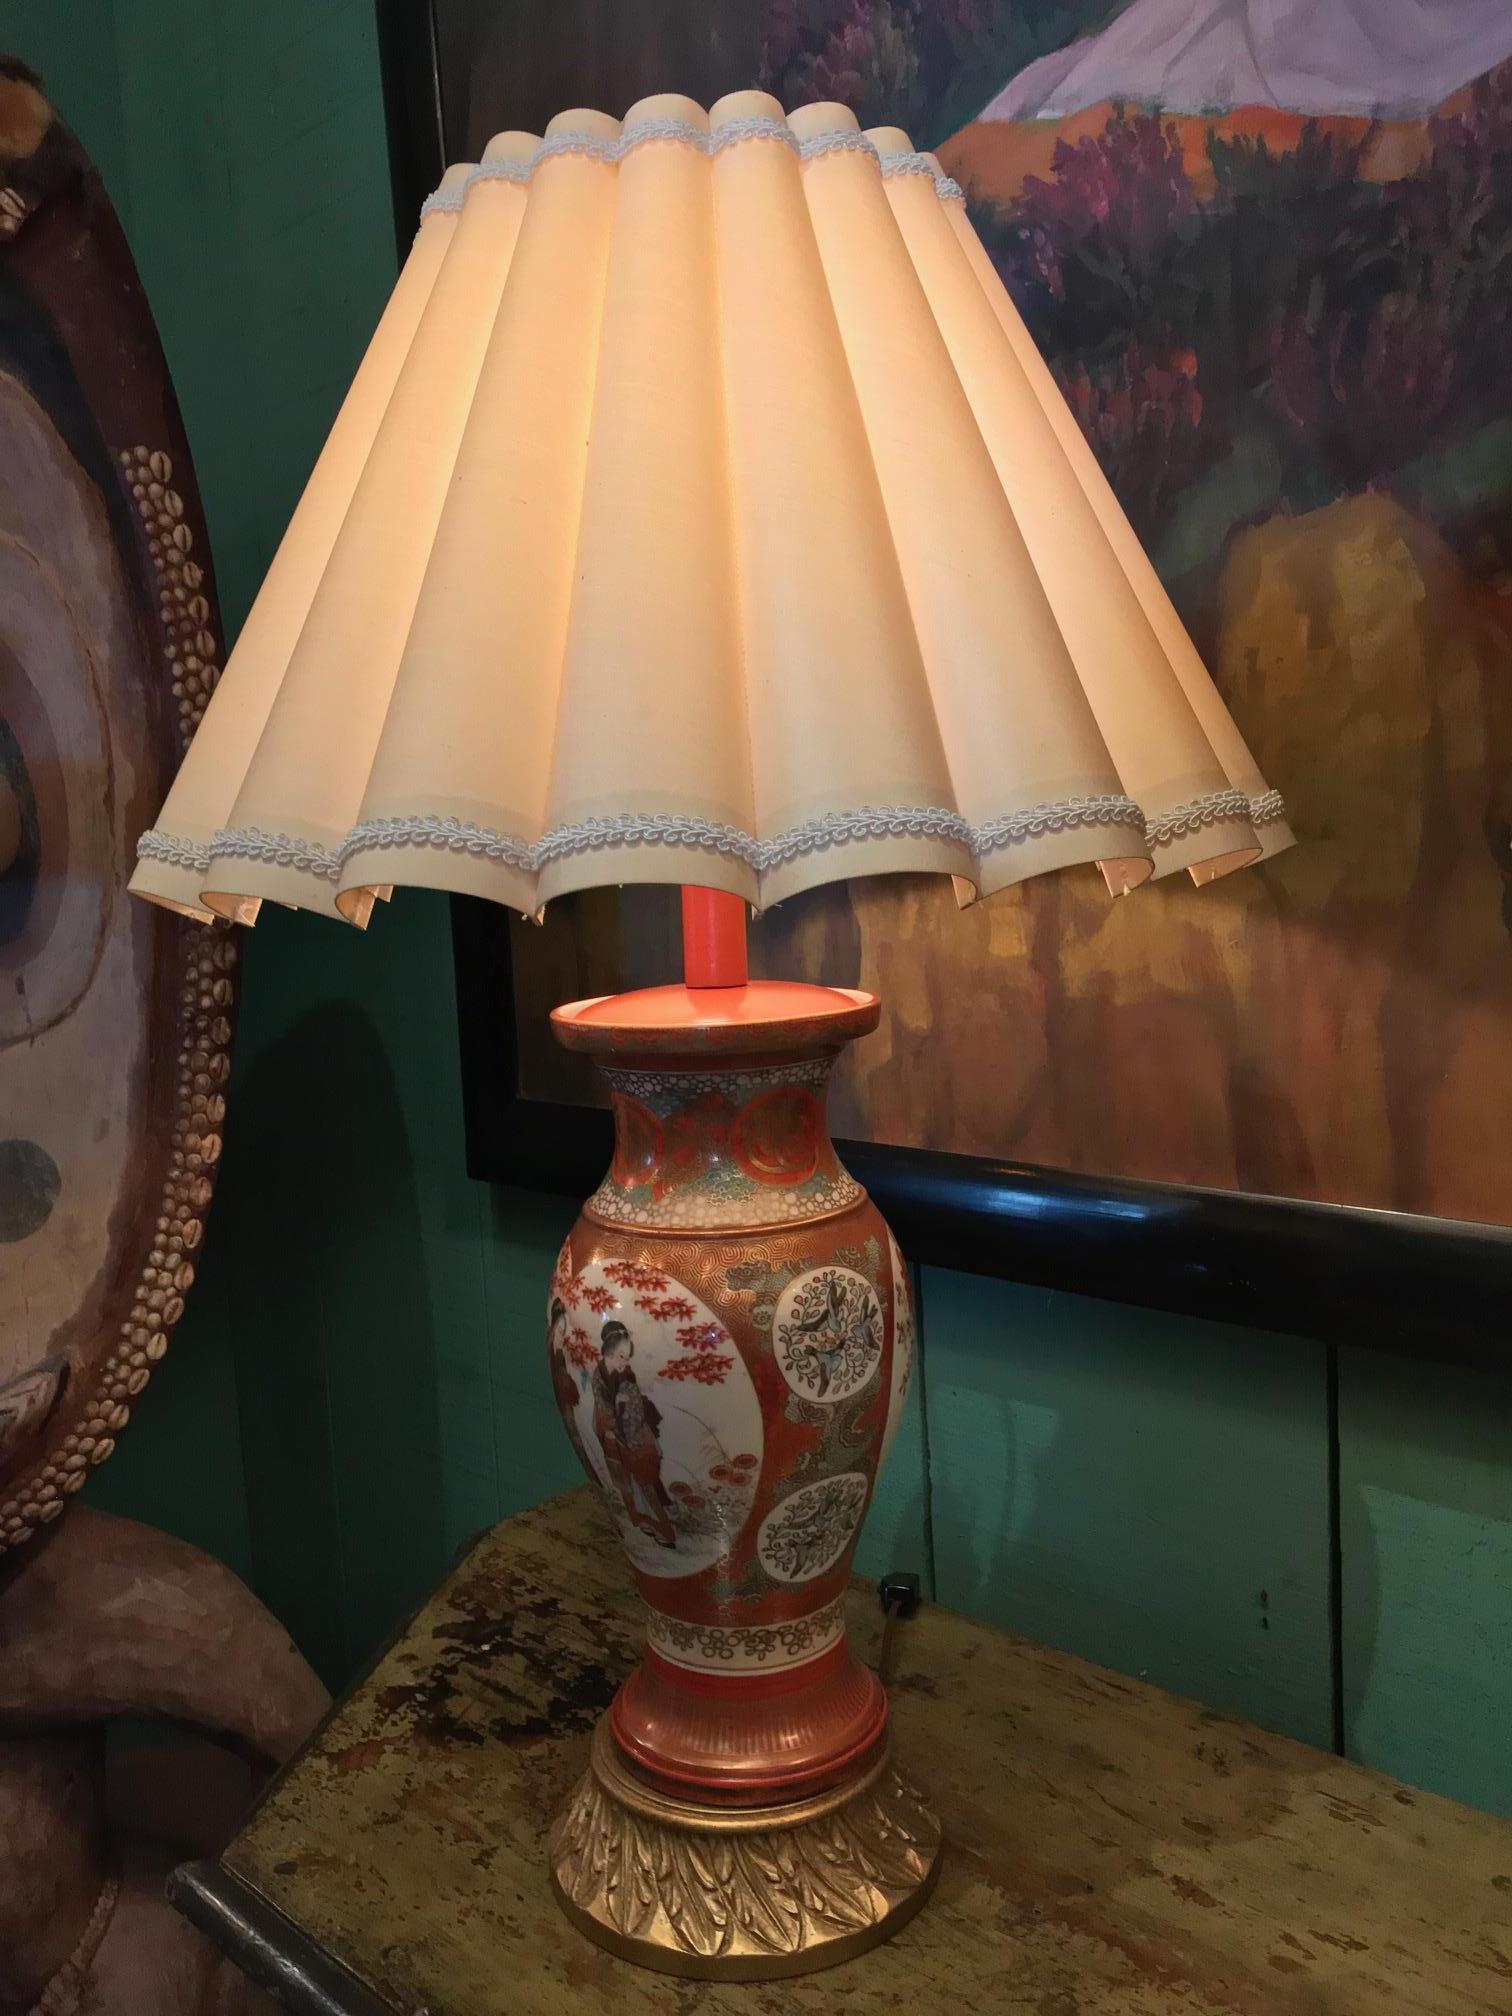 Pair of Kutani Meiji Period Vases Porcelain Urns Table Lamps Antiques LA light  In Good Condition For Sale In West Hollywood, CA